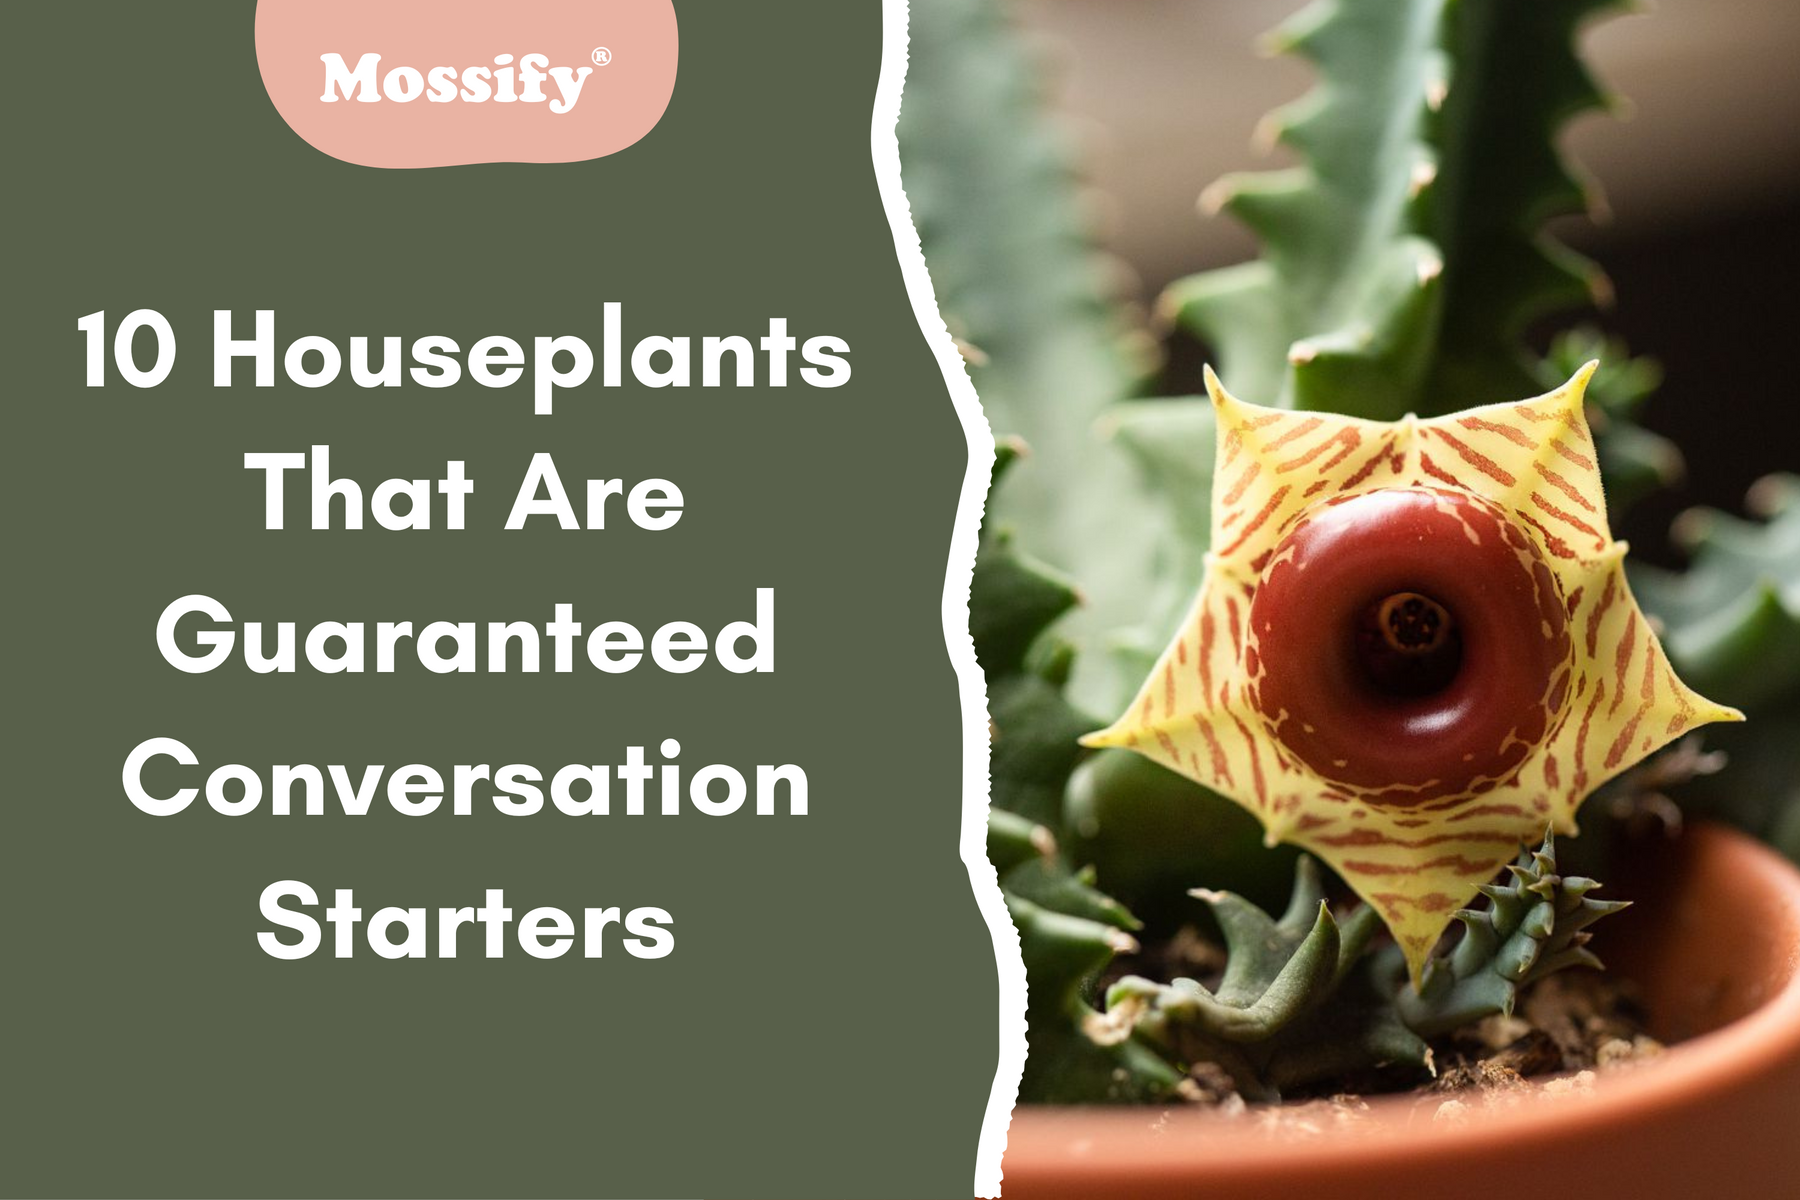 10 Houseplants That Are Guaranteed Conversation Starters